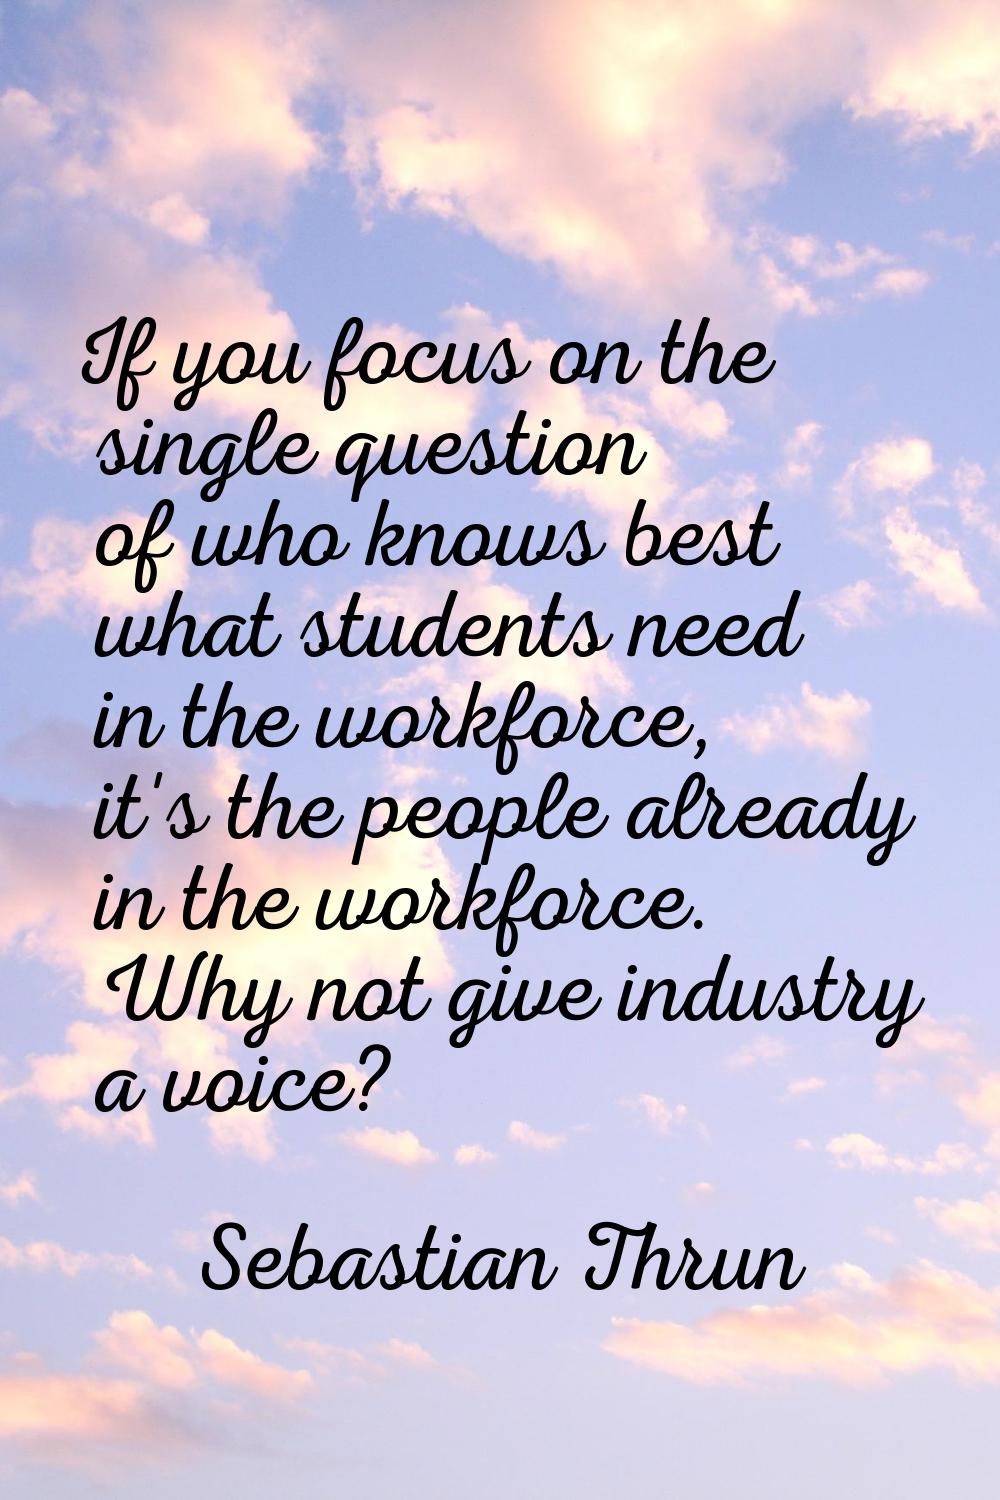 If you focus on the single question of who knows best what students need in the workforce, it's the